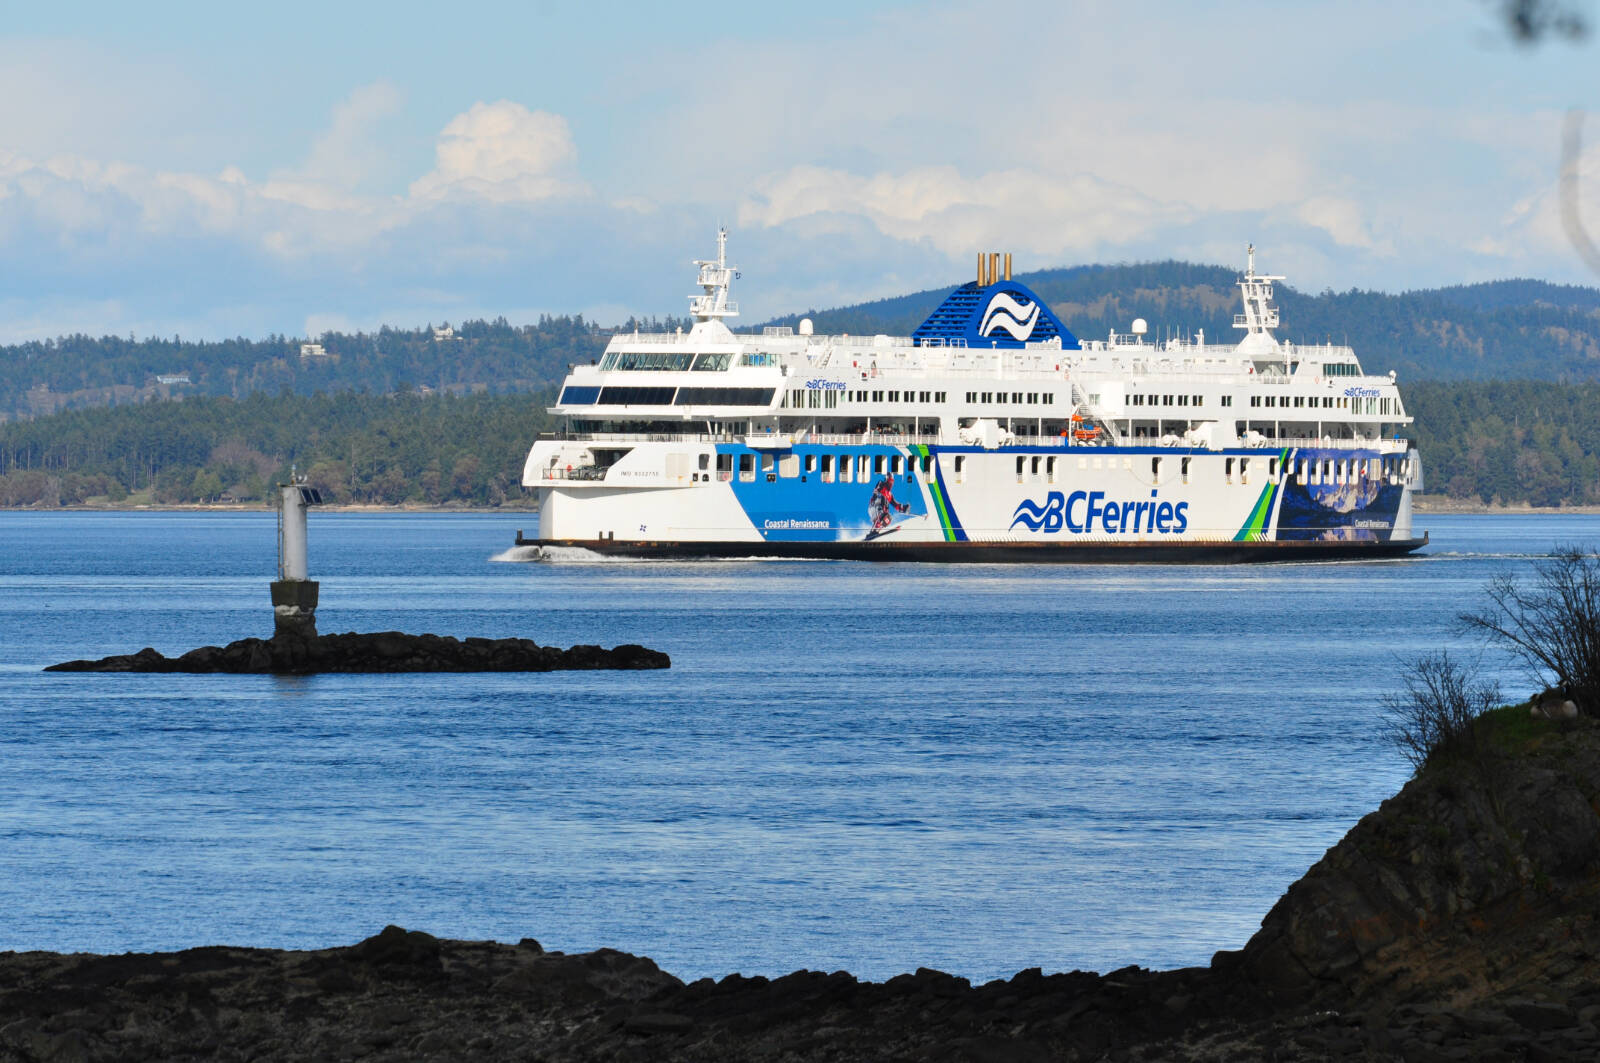 Several BC Ferries sailings between Victoria and Tsawwassen are cancelled due to high winds in the forecast on March 11. (Black Press Media file photo).